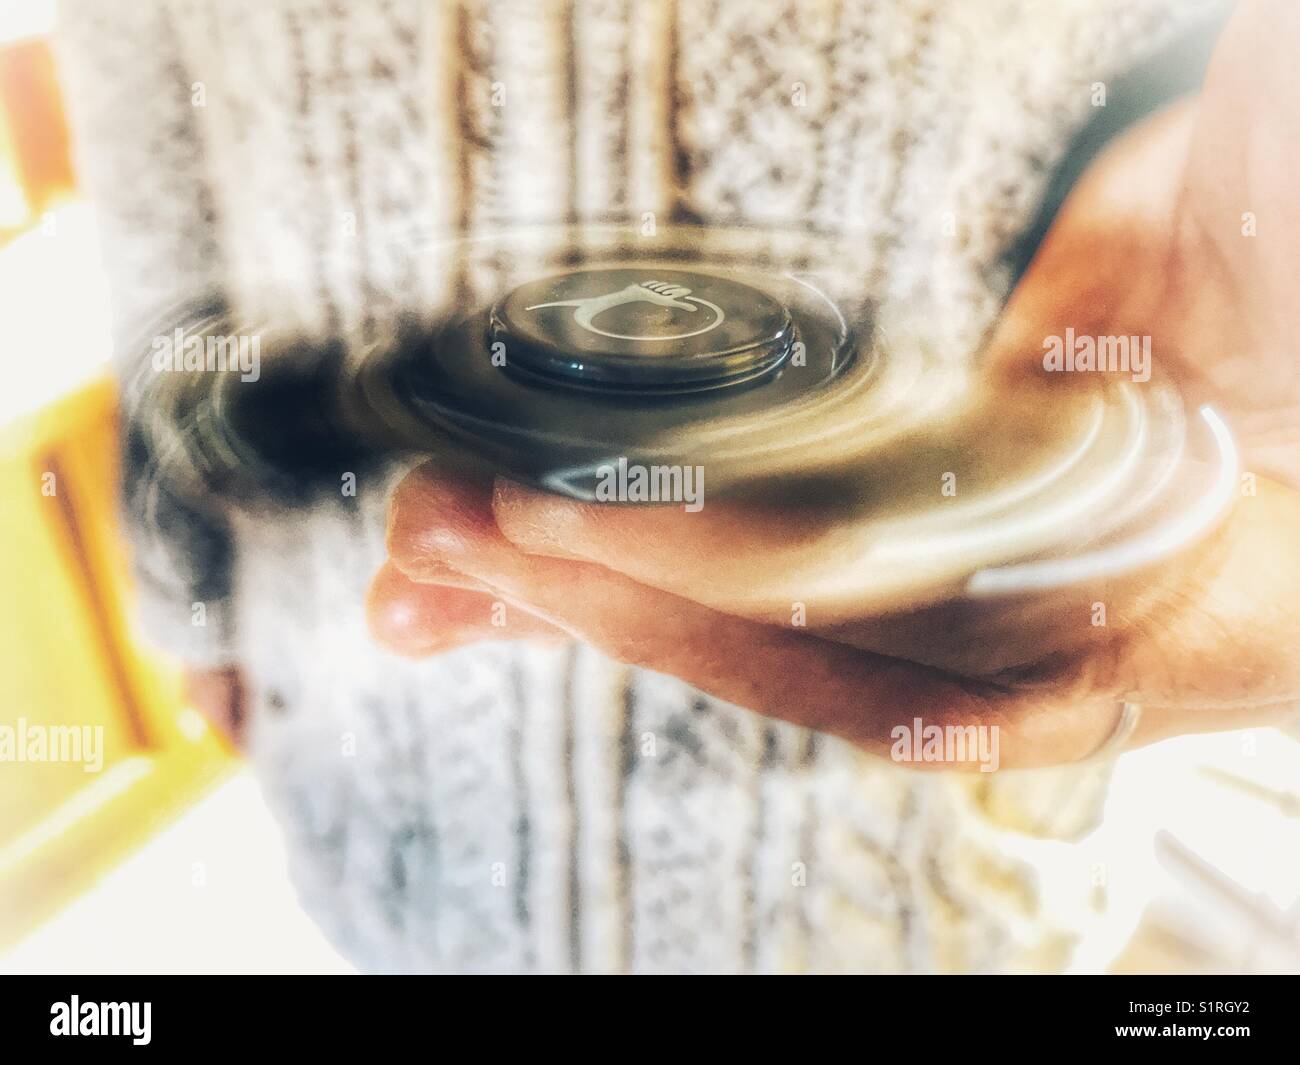 Fidget spinner, high angle view Stock Photo